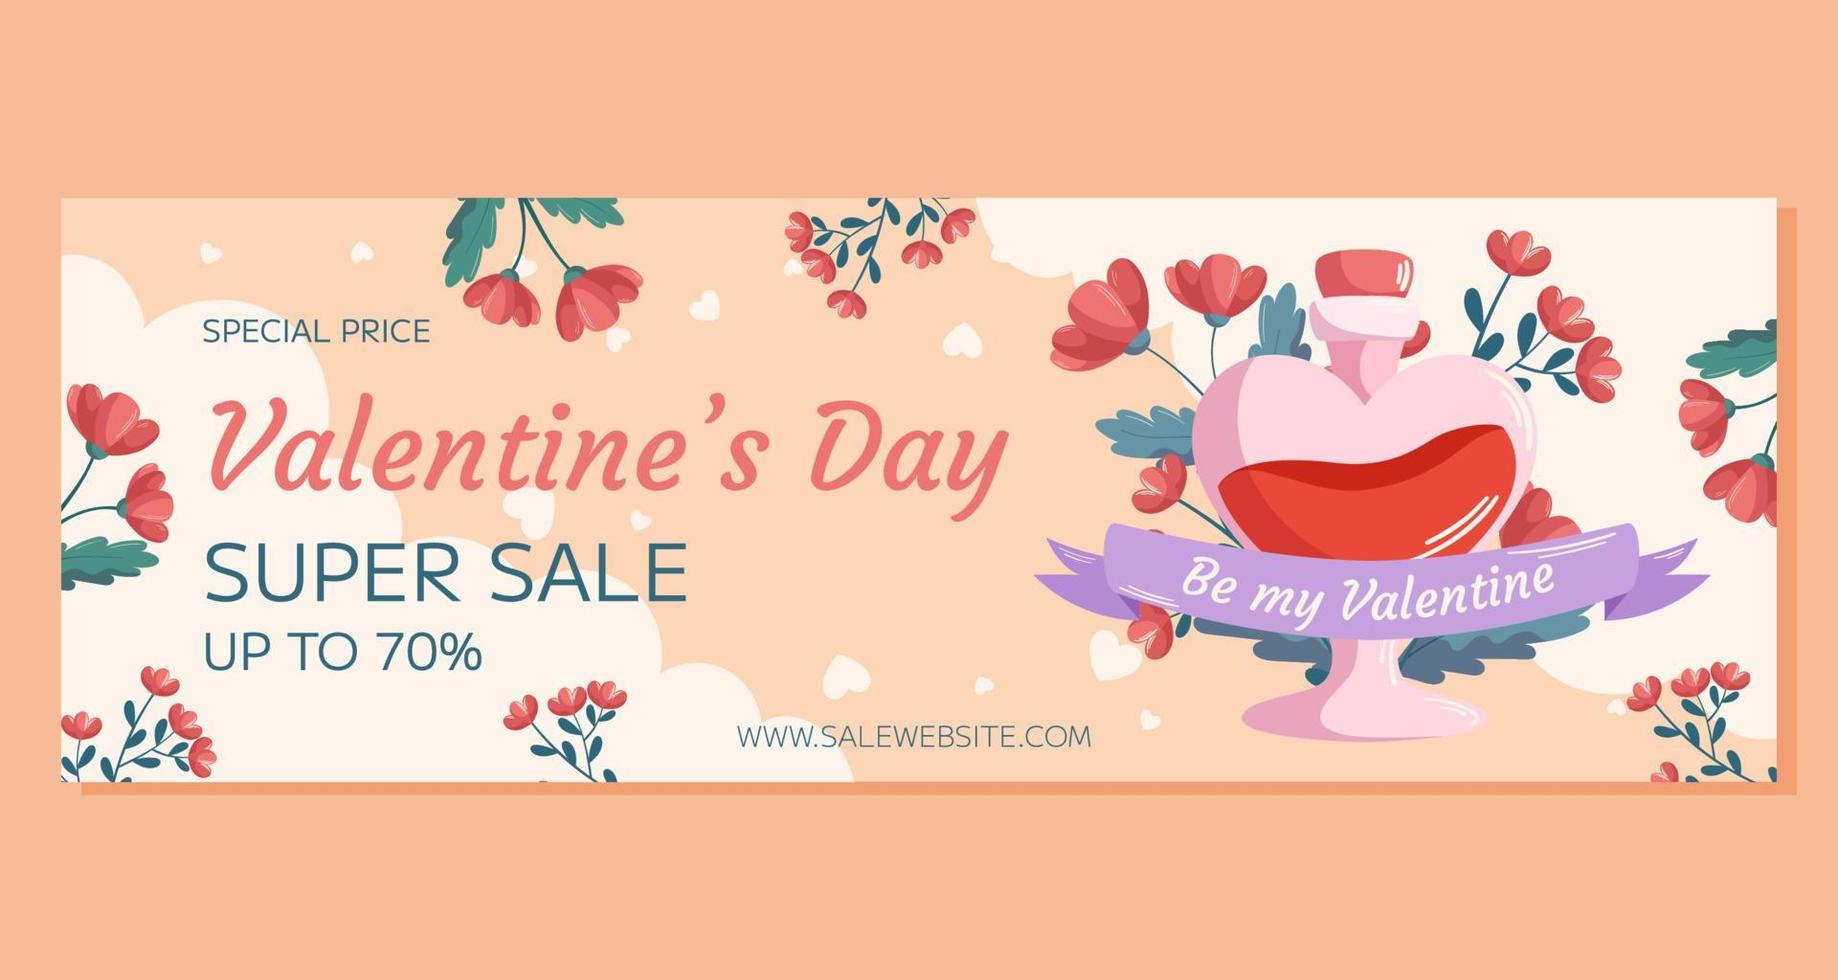 St. Valentine's Day horizontal Super Sale banner template design. Love potion bottle concept illustration with red flowers behind it with ribbon on beige backdrop. Special Price  online shopping vector